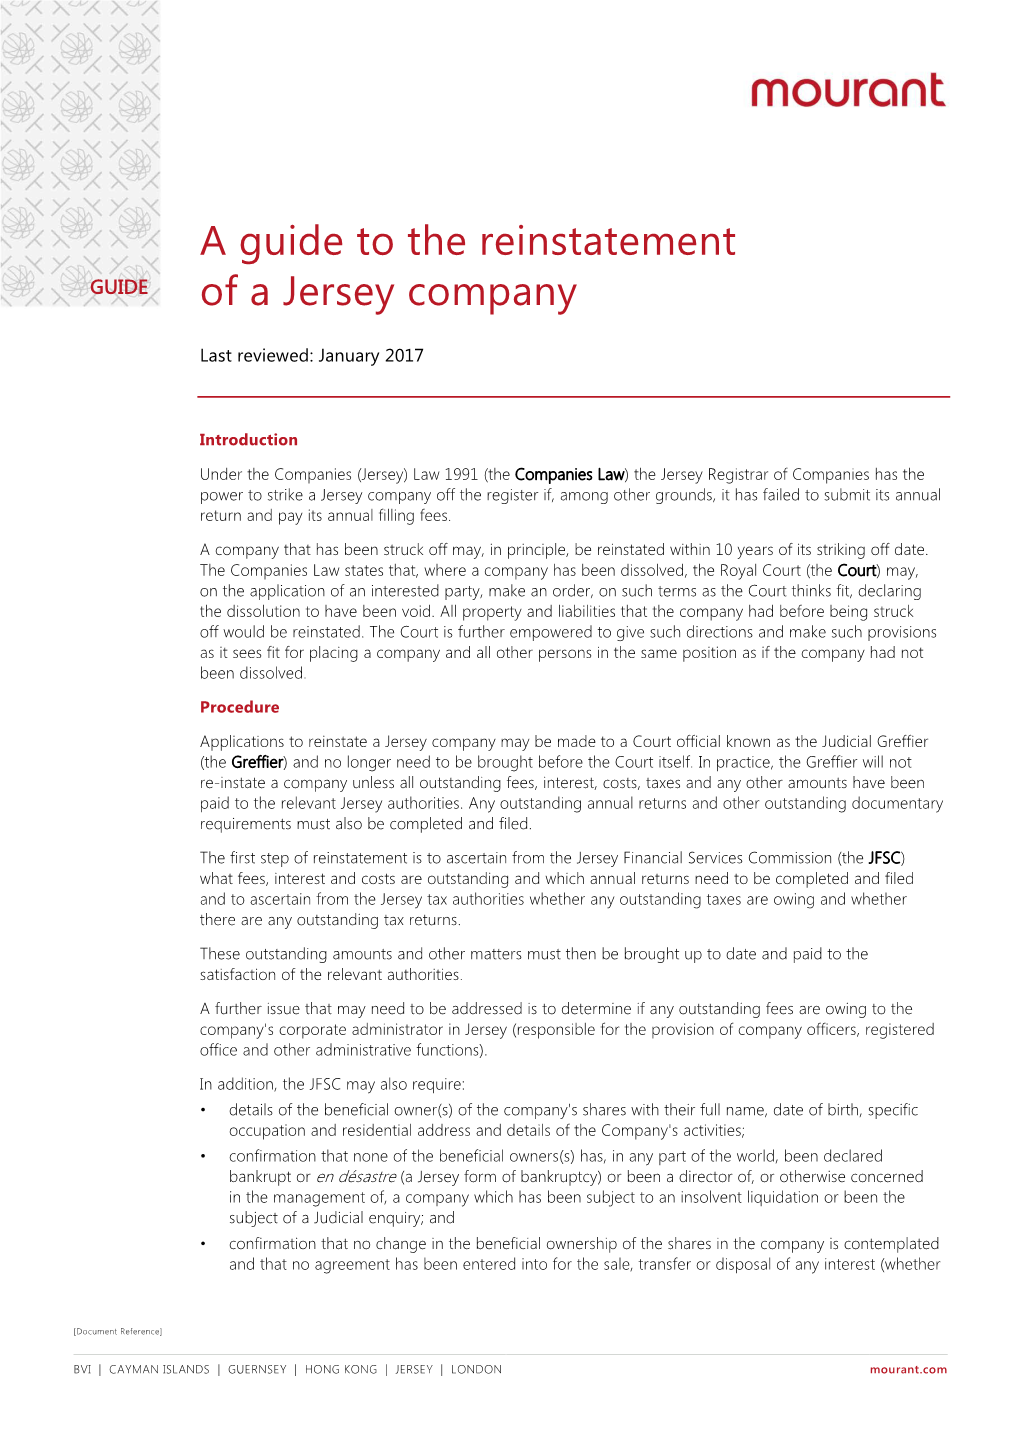 A Guide to the Reinstatement of a Jersey Company.Docx